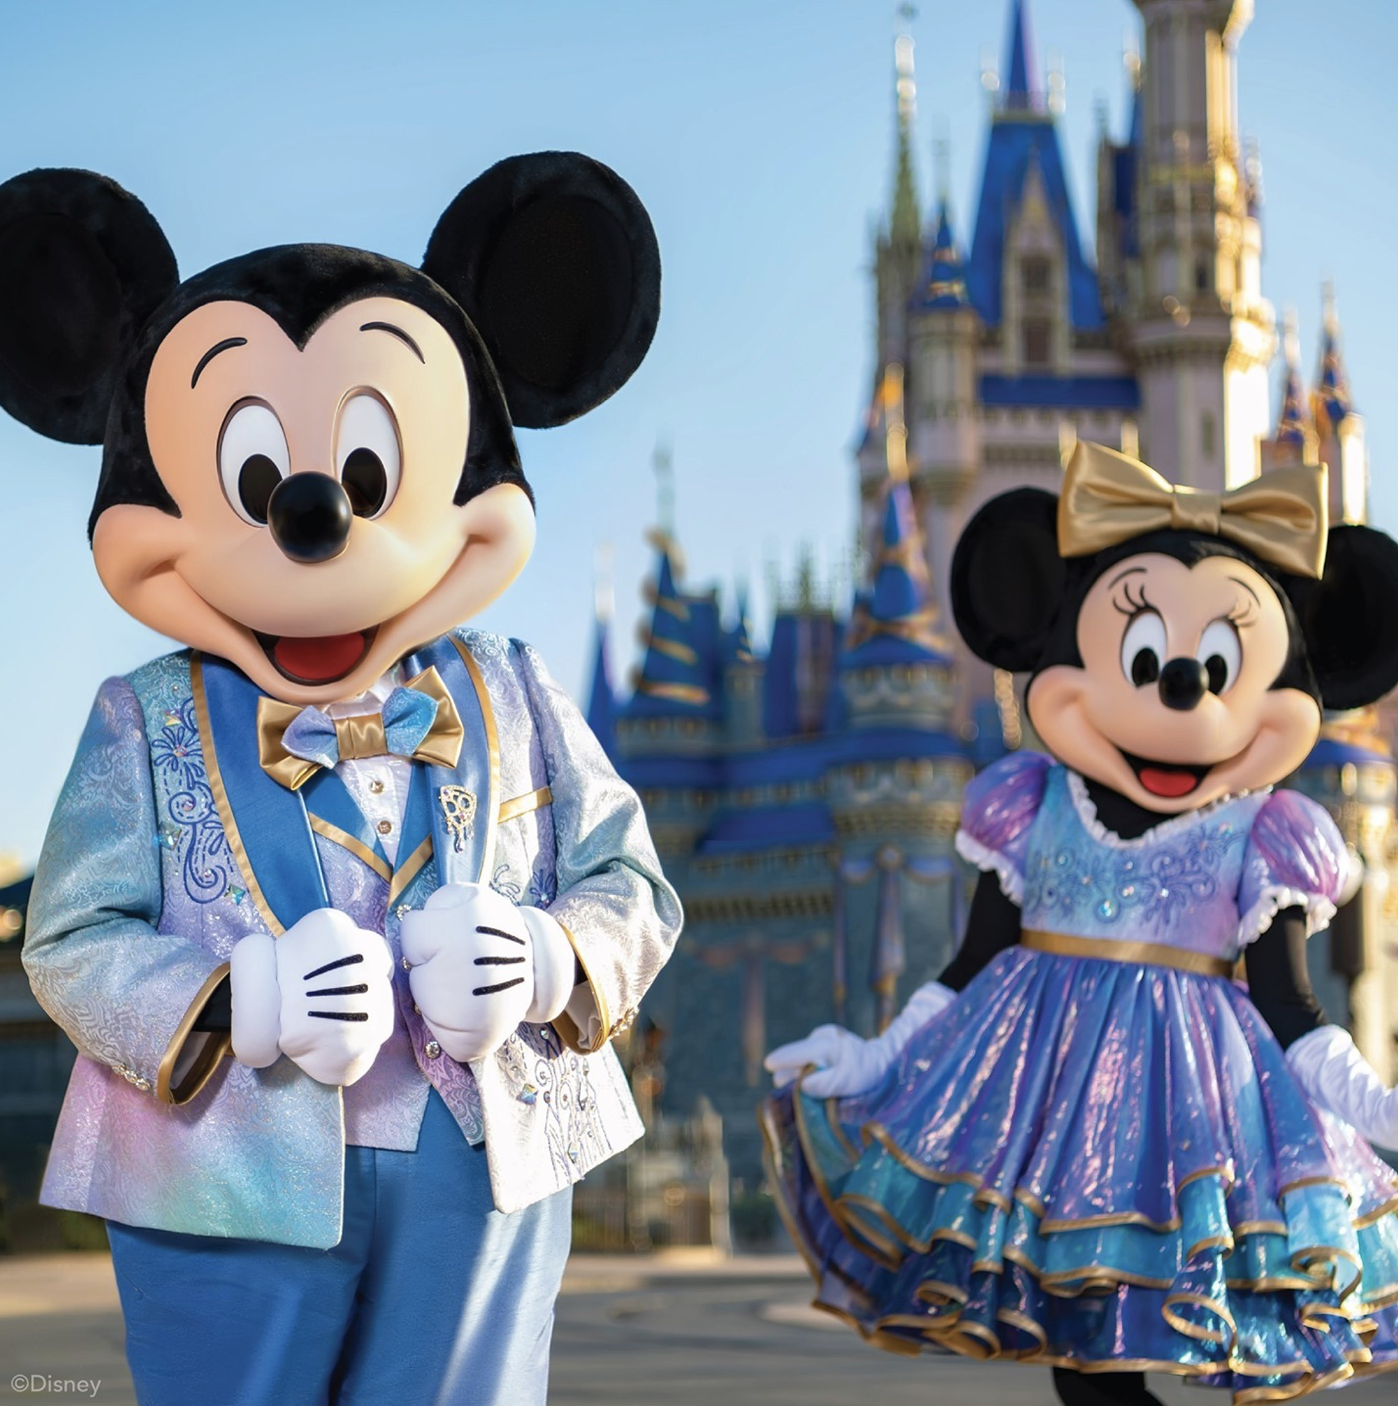 Mickey and Minnie Mouse pose in front of Cinderella's Castle in Magic Kingdom of Walt Disney World, Orlando, Florida. They are dressed in special outfits to celebrate the 50th anniversary of the theme park. Their clothes are a tie-dye of pastel blue and pink with golden accents.